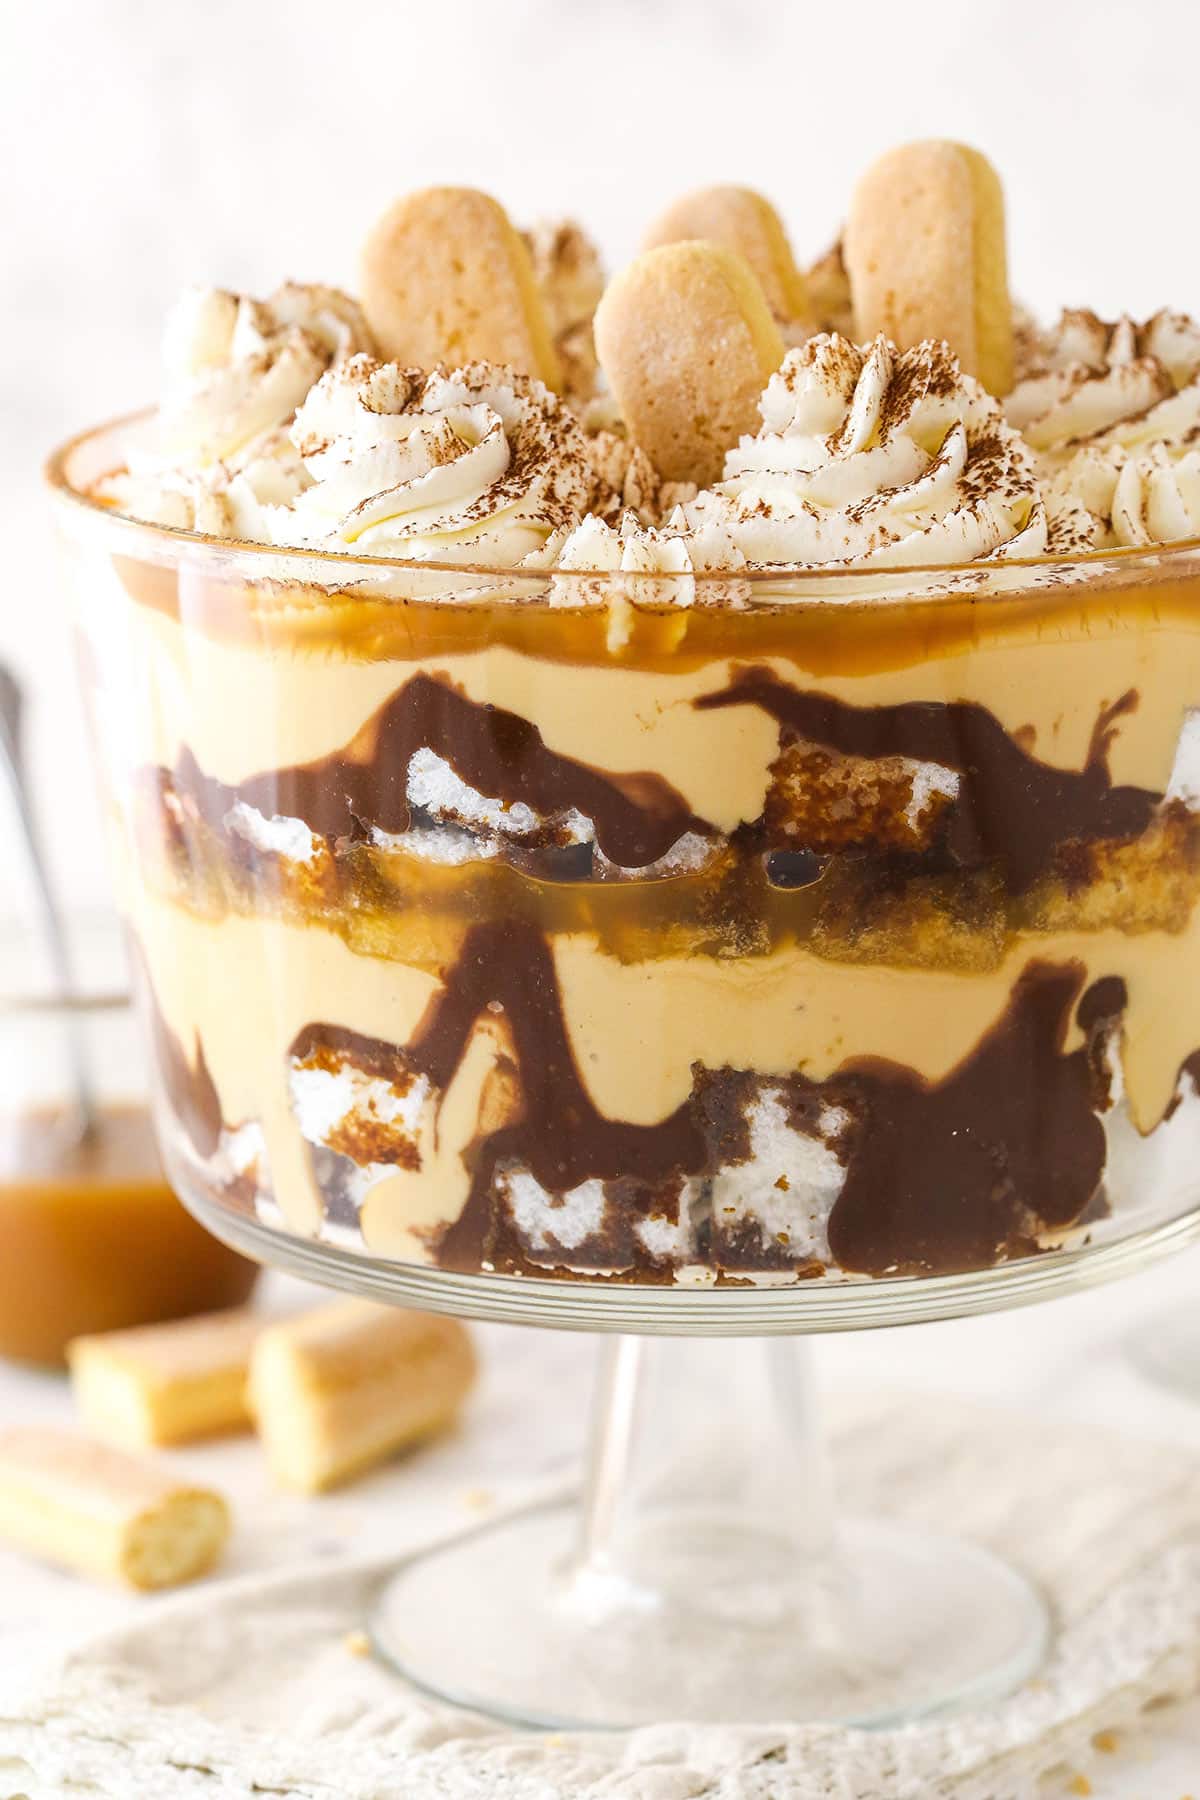 Tiramisu trifle with lady fingers and a jar of caramel sauce in the background.